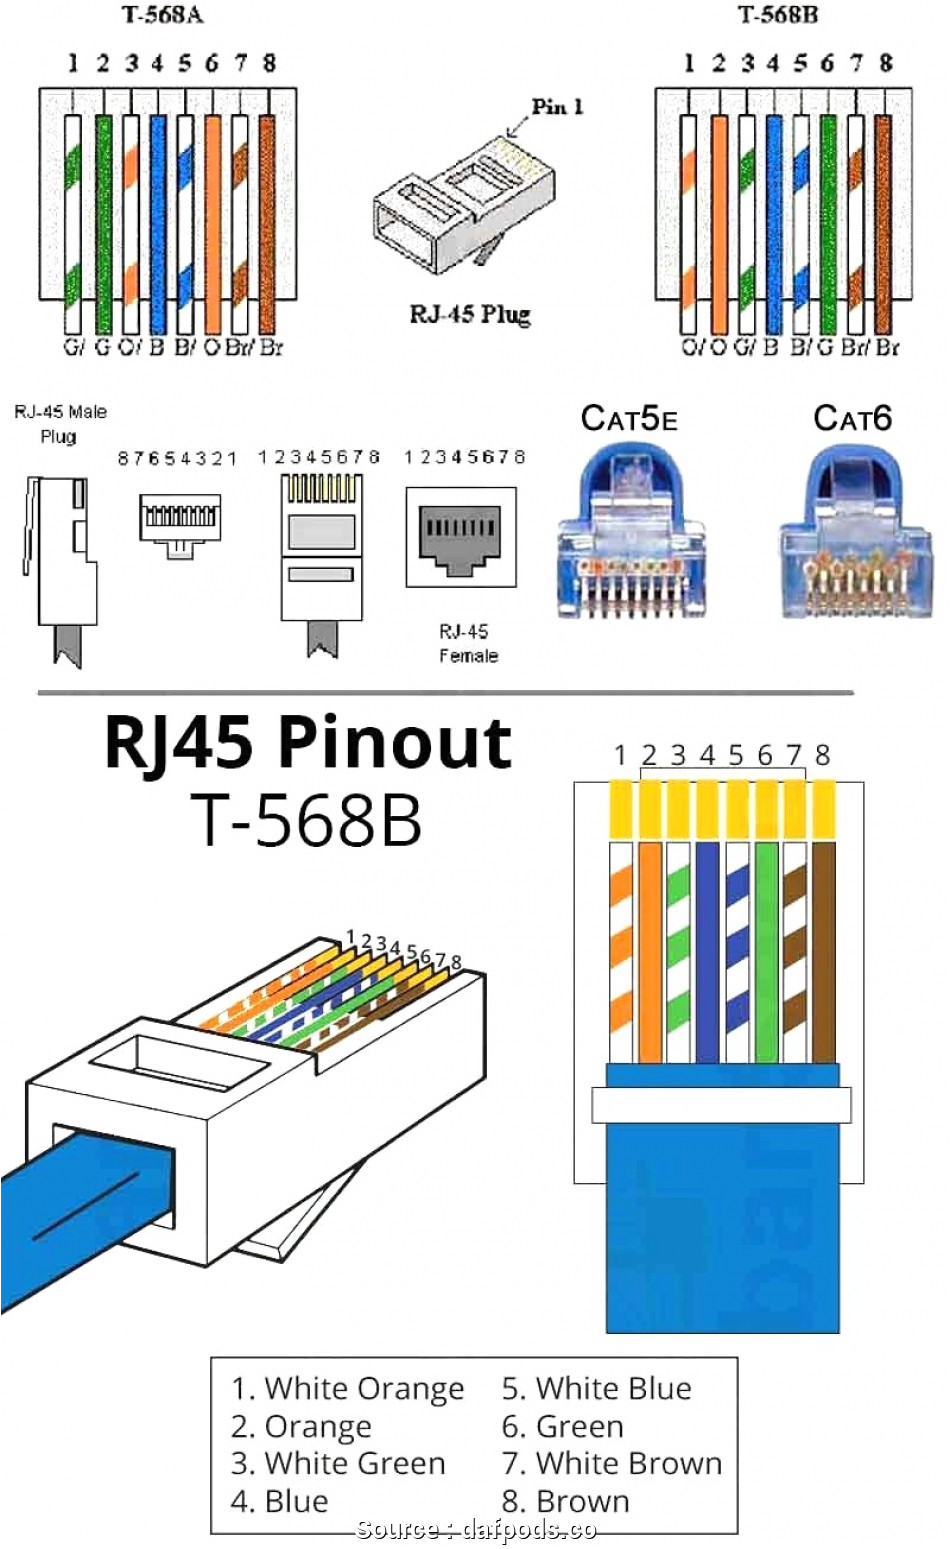 ethernet cable wiring diagram cat6 wiring diagram gigabit ethernet valid cable of network 5e pinout diagram cat5e ethernet cable wiring diagram 43 53544 jpg